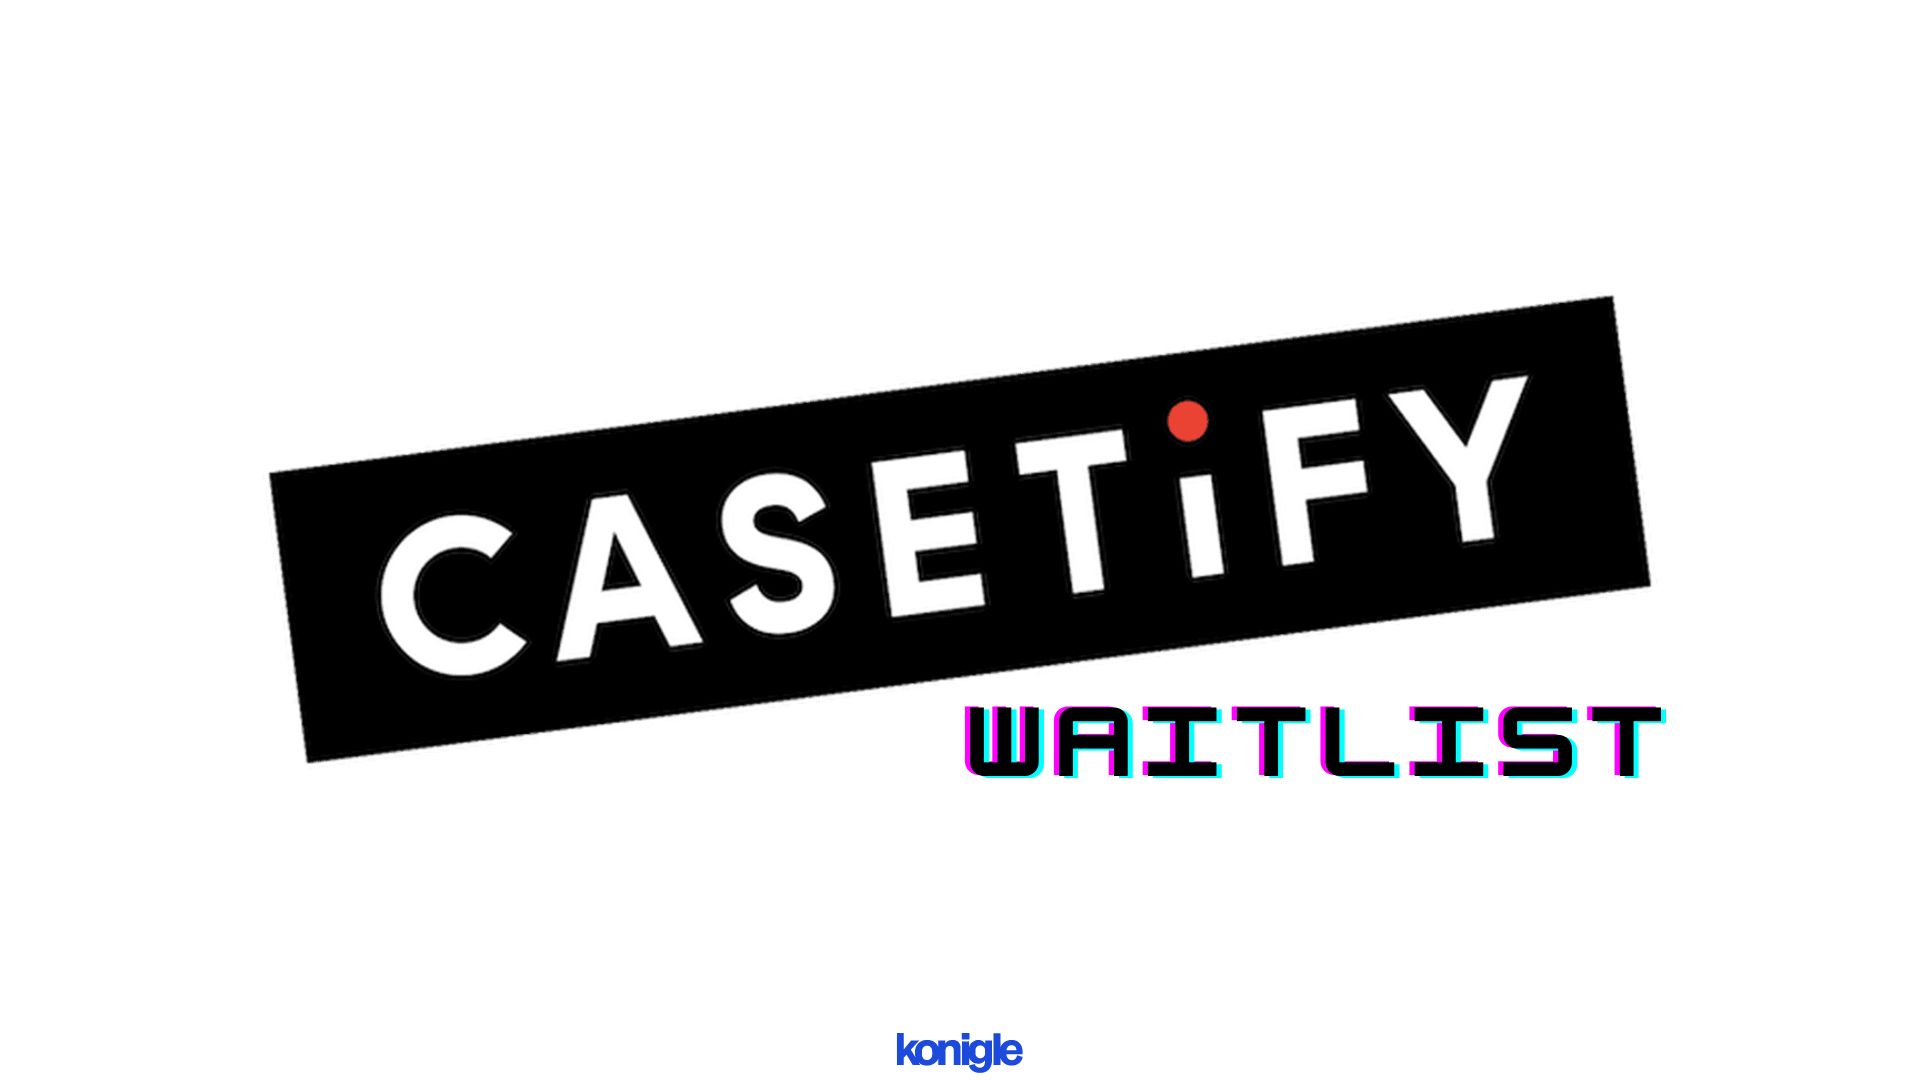 How Casetify uses waitlist on their Limited Edition products